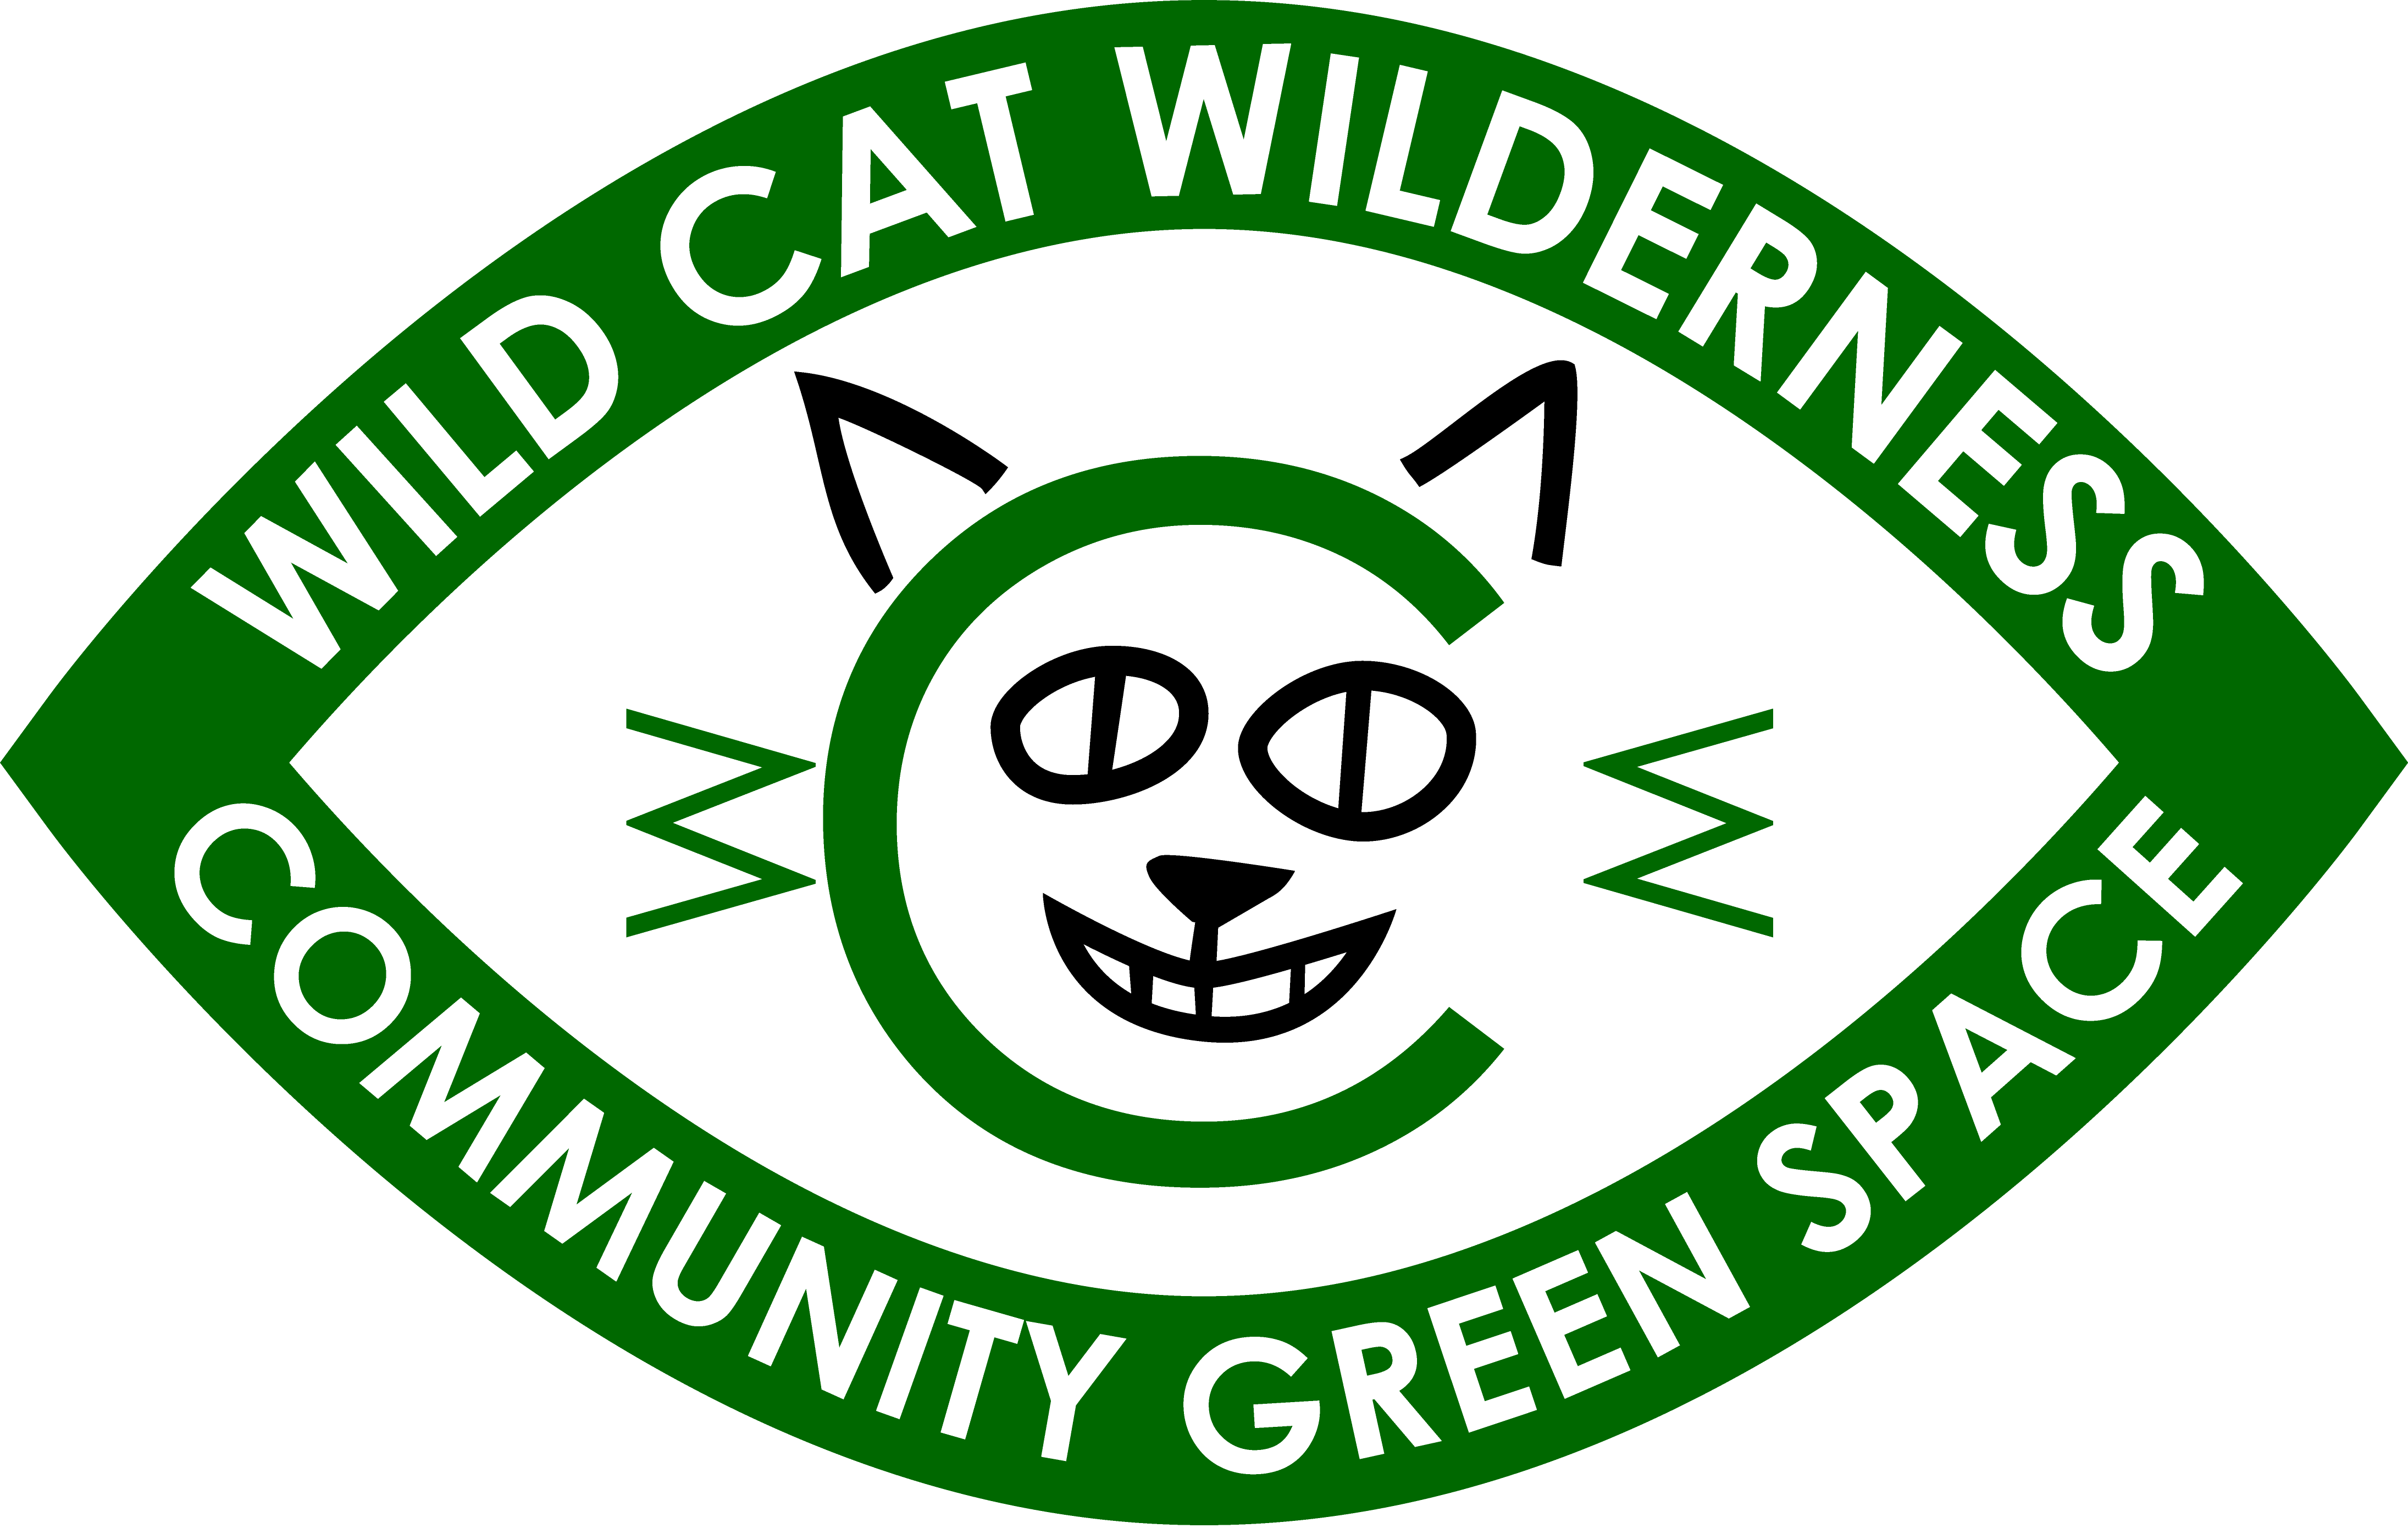 What Has a Green Oval Logo - Who are we? - Wildcat Wilderness